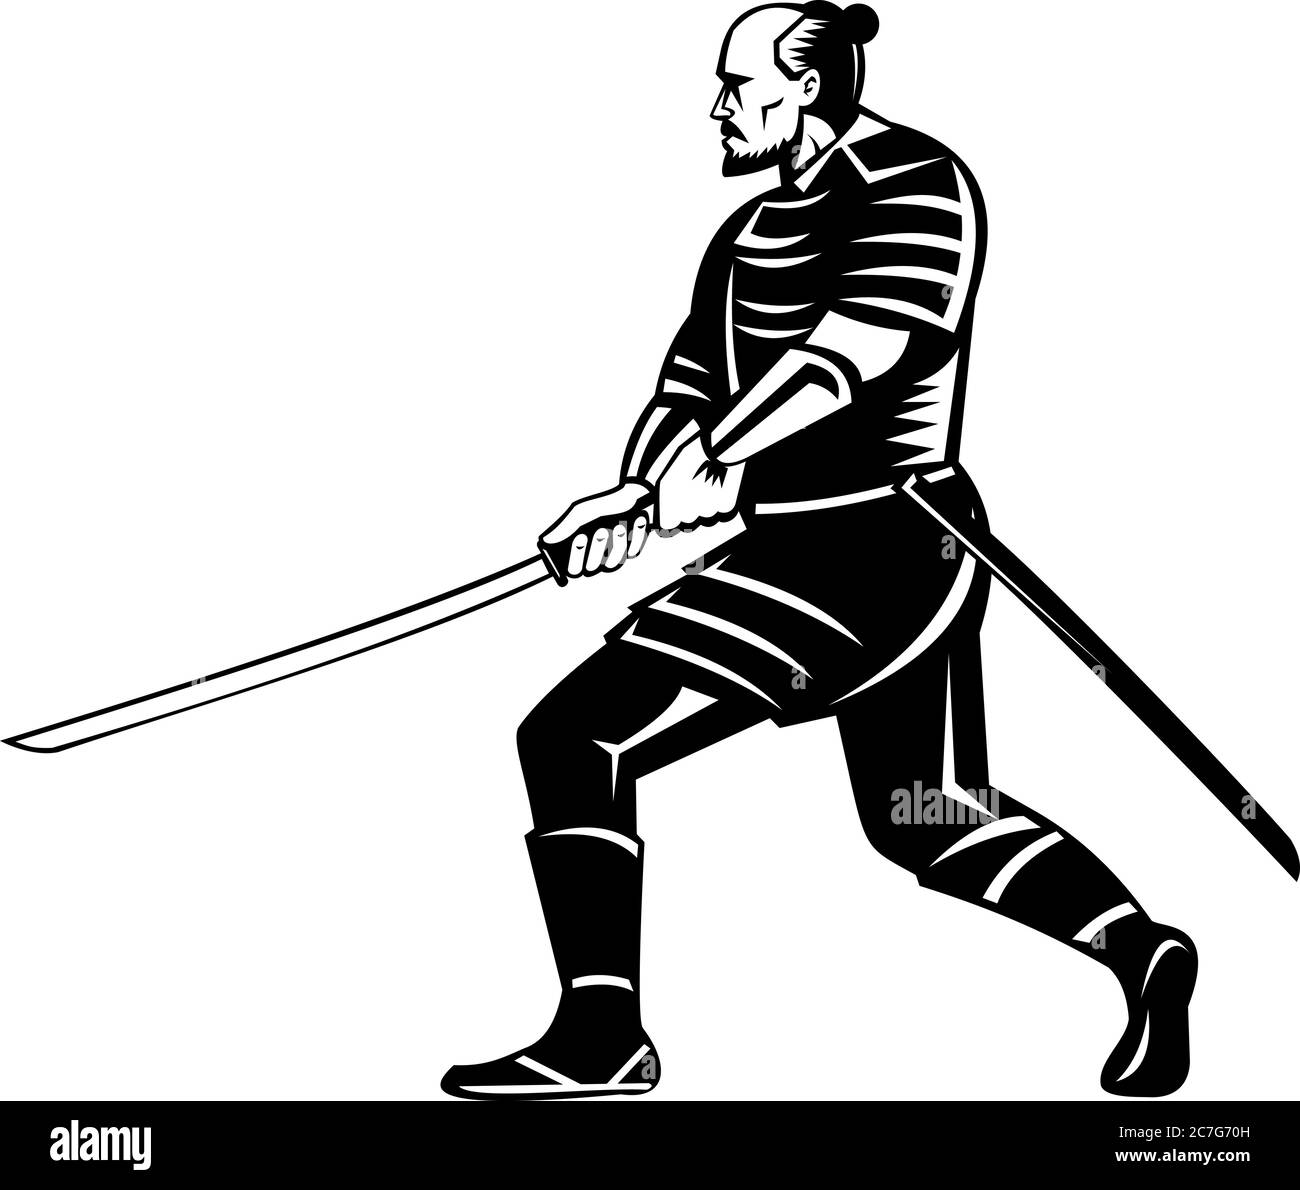 Retro black and white style illustration of a samurai warrior with katana sword in fighting stance viewed from side on isolated white background. Stock Vector